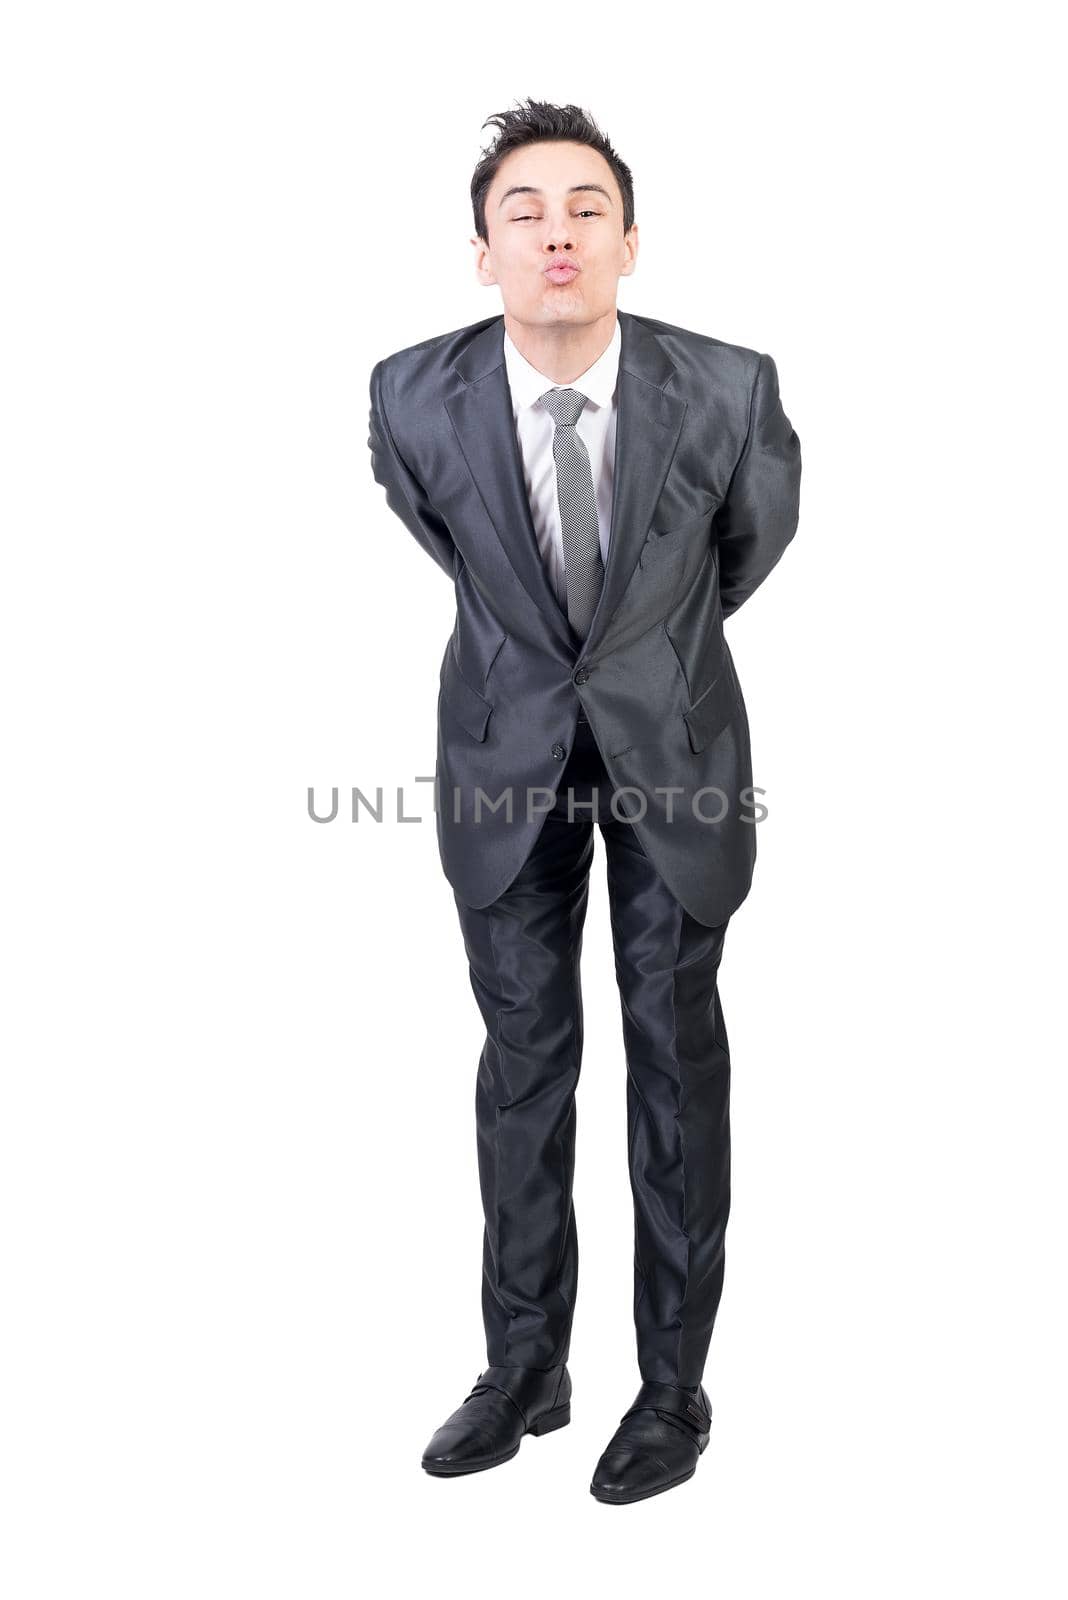 Full body of positive young guy with dark hair in elegant suit pouting lips and looking at camera while leaning forward with hands behind back against white background